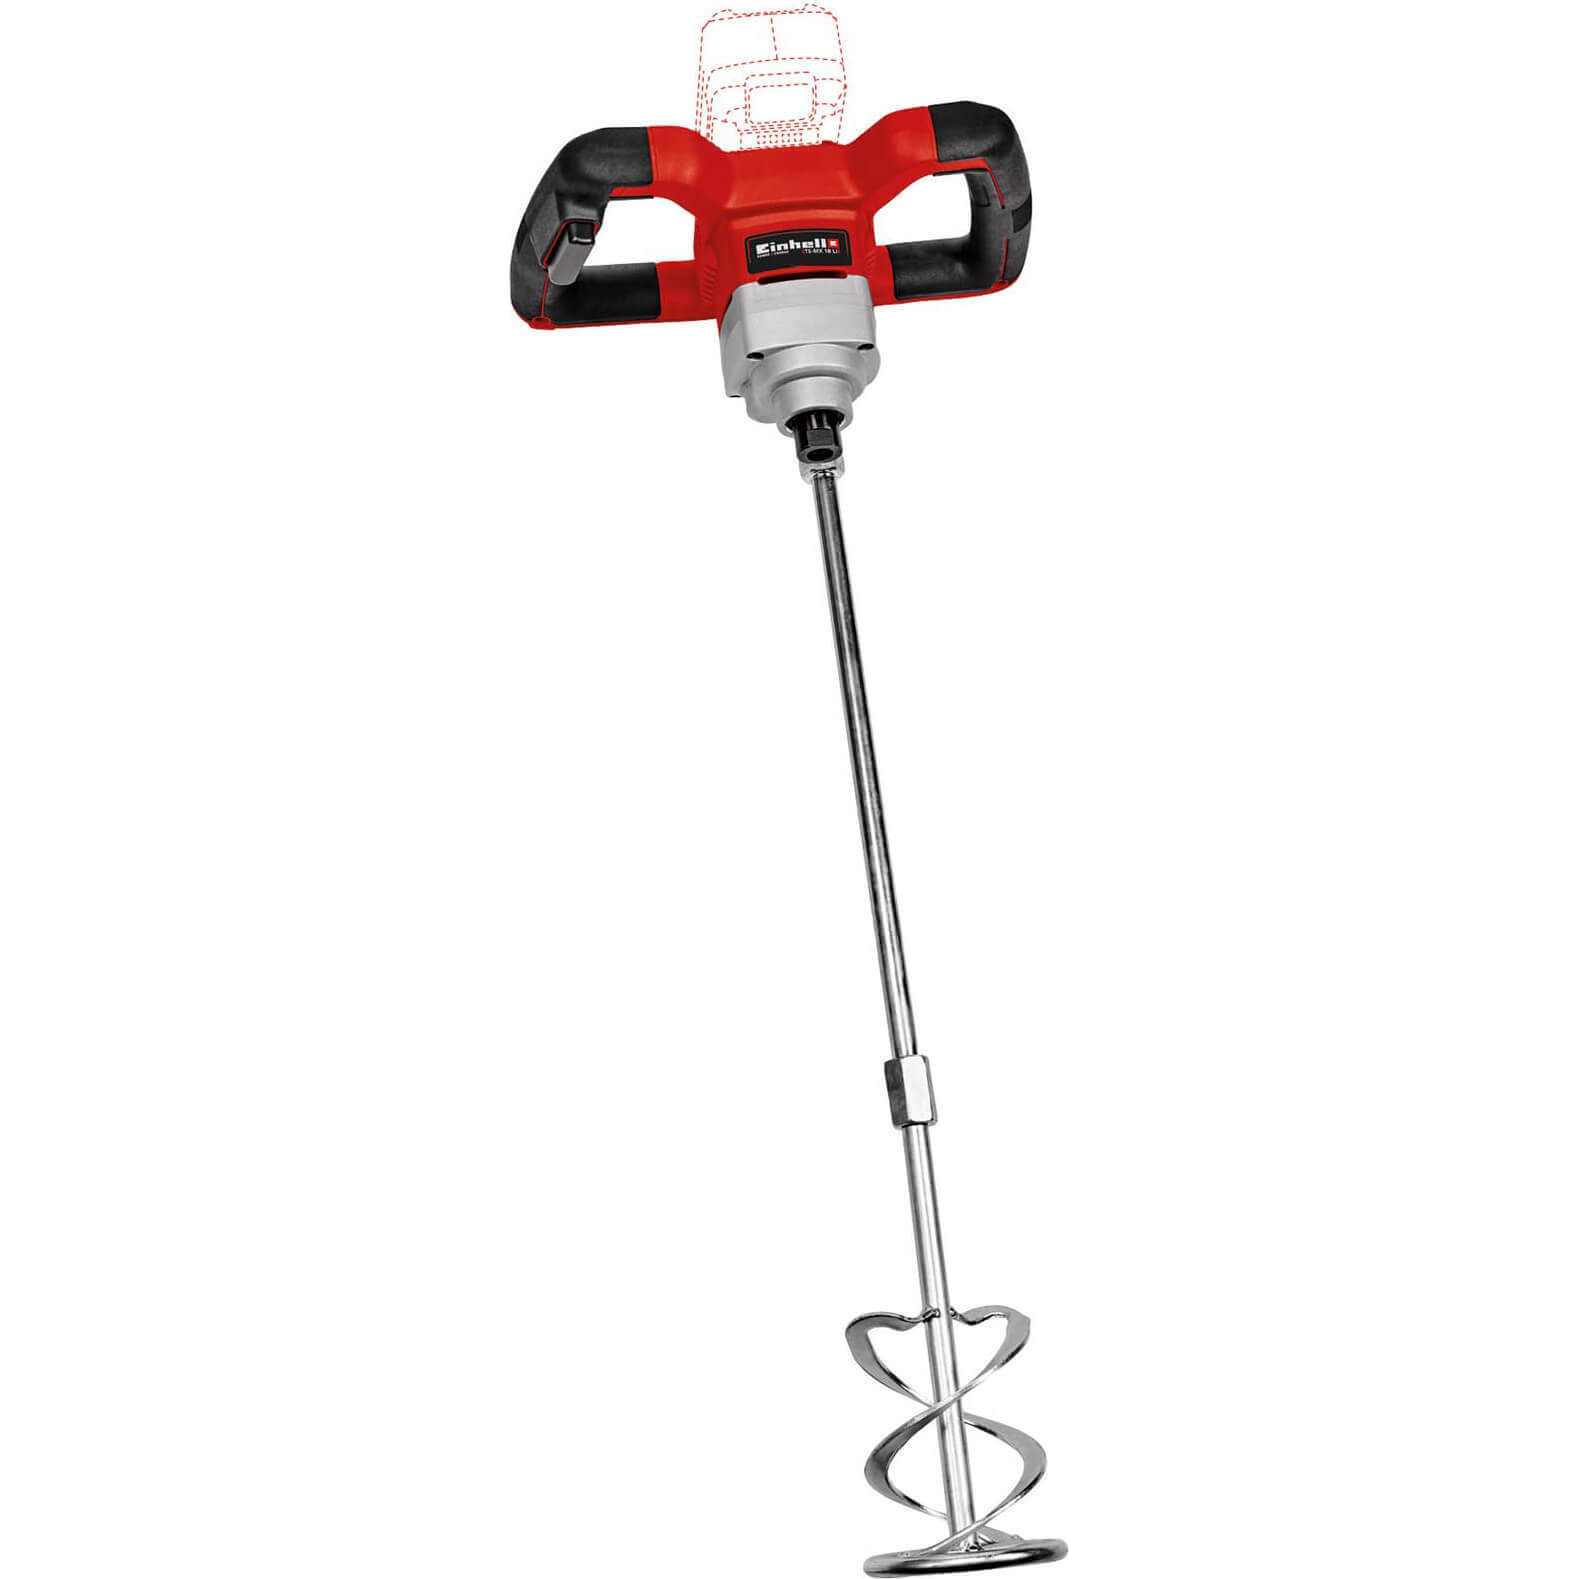 Photo of Einhell Te-mx 18 Li 18v Cordless Paint And Plaster Mixer No Batteries No Charger No Case